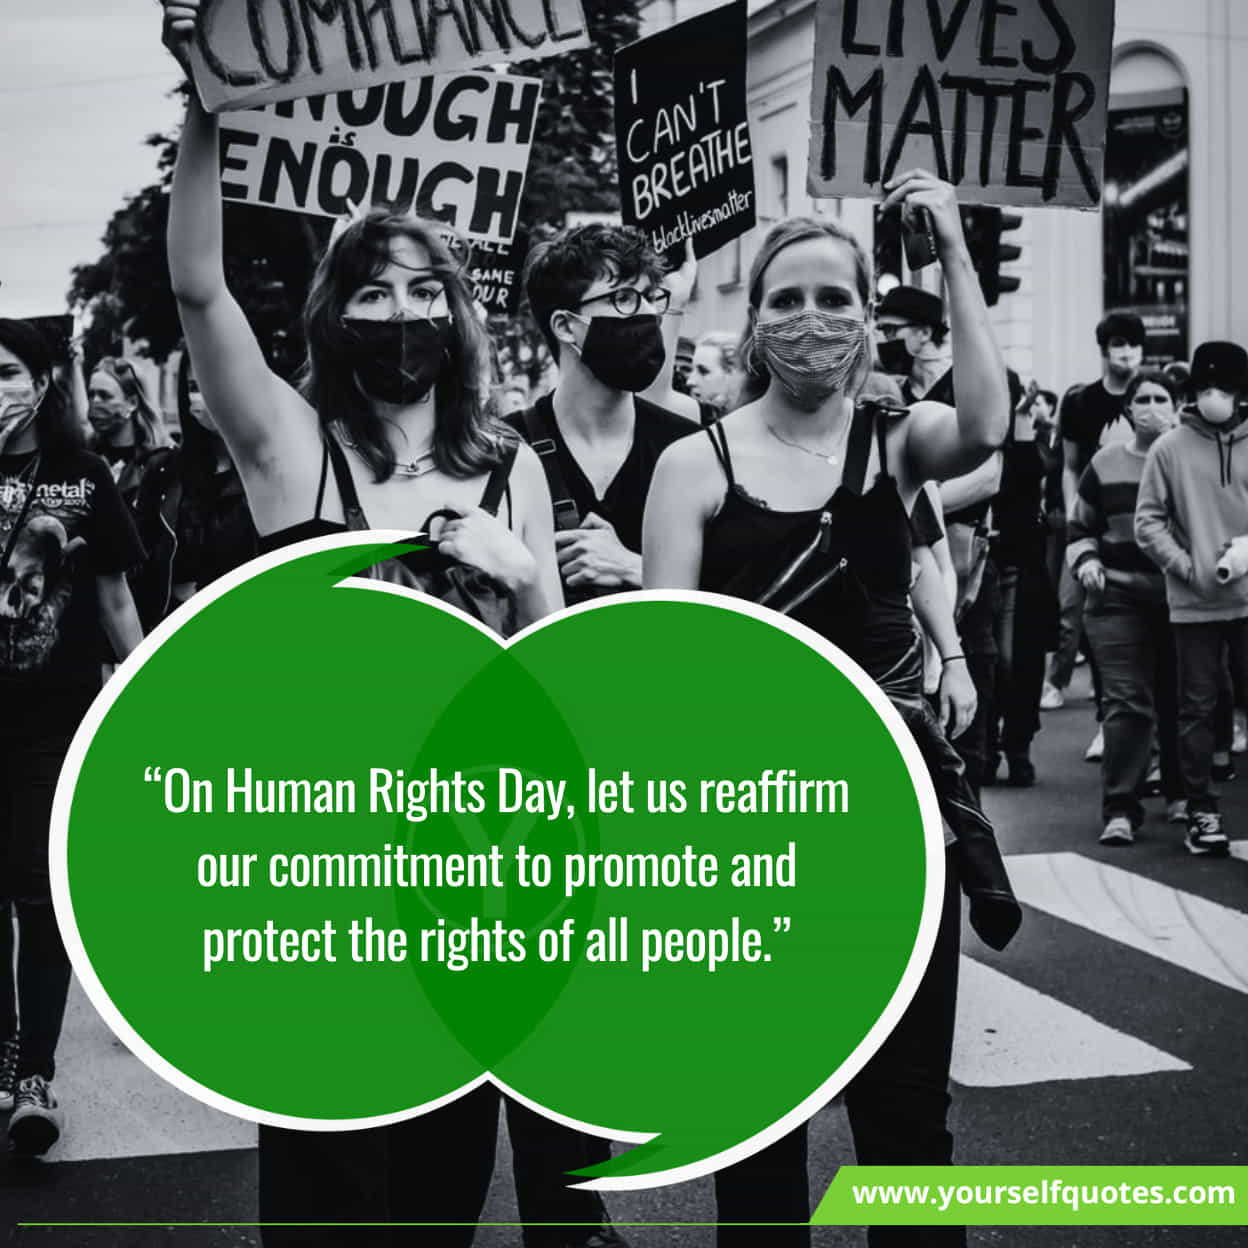 Human Rights Day Messages